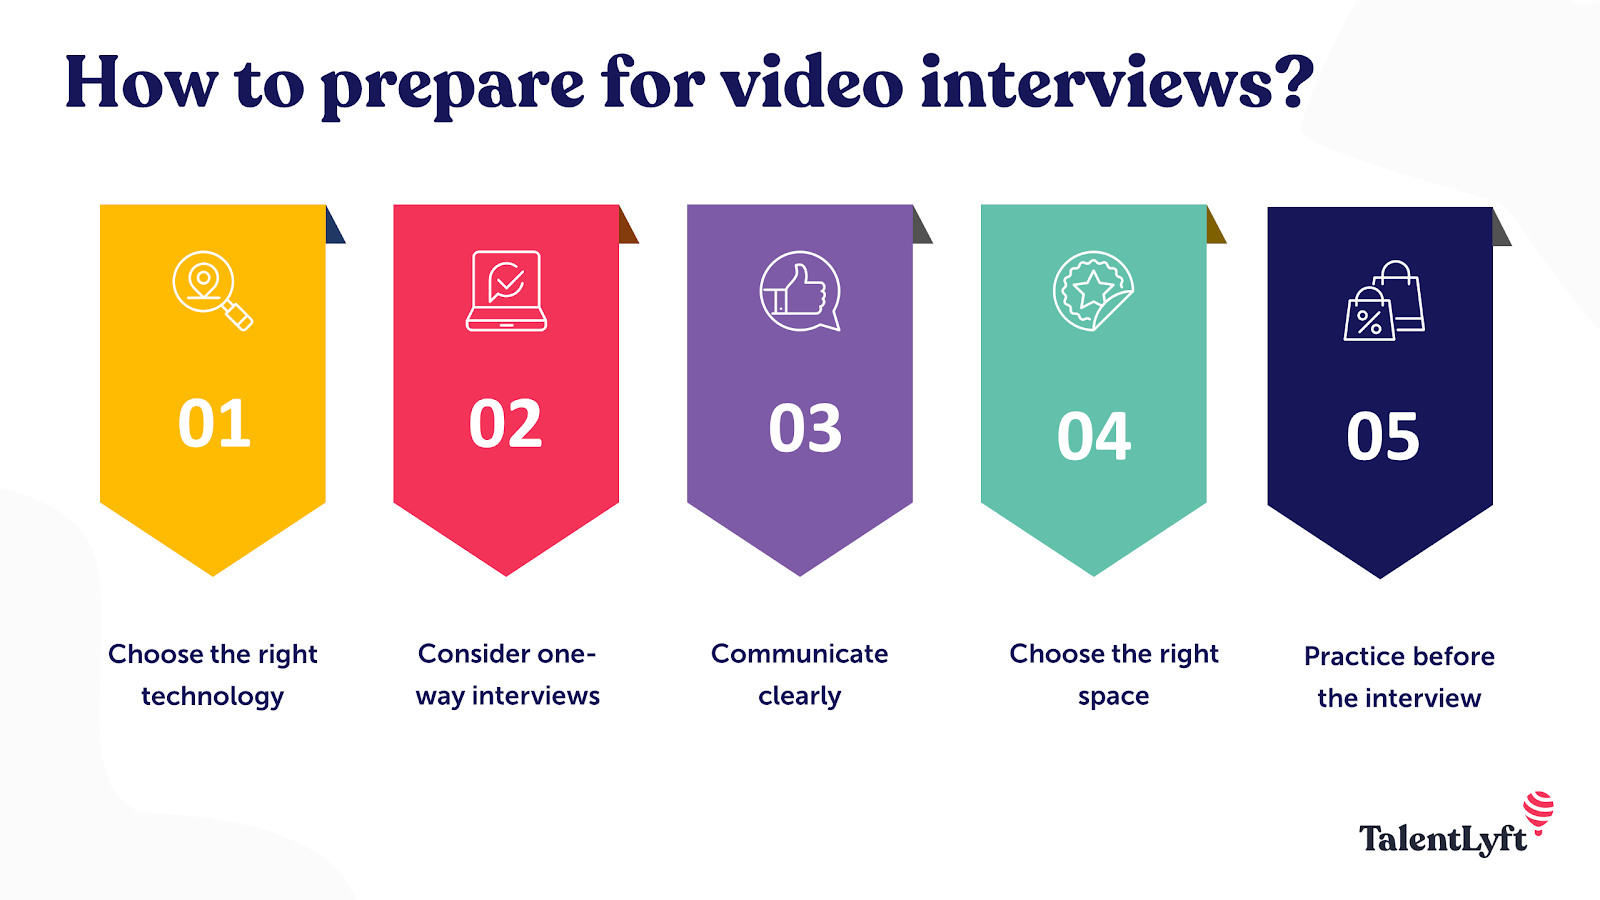 How to conduct video interviews